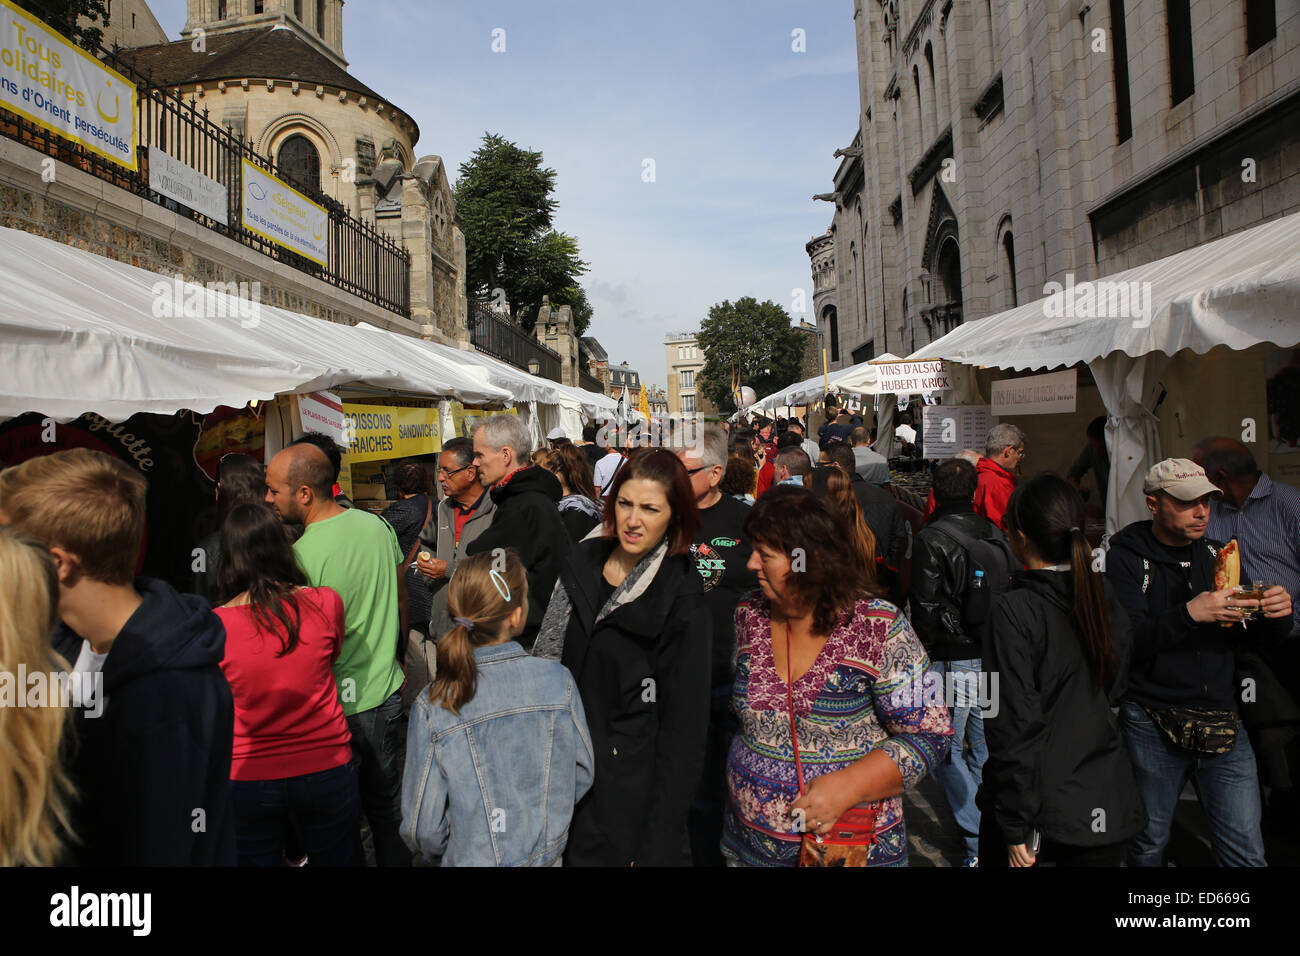 Paris street food vendor stall busy congested crowd people Stock Photo